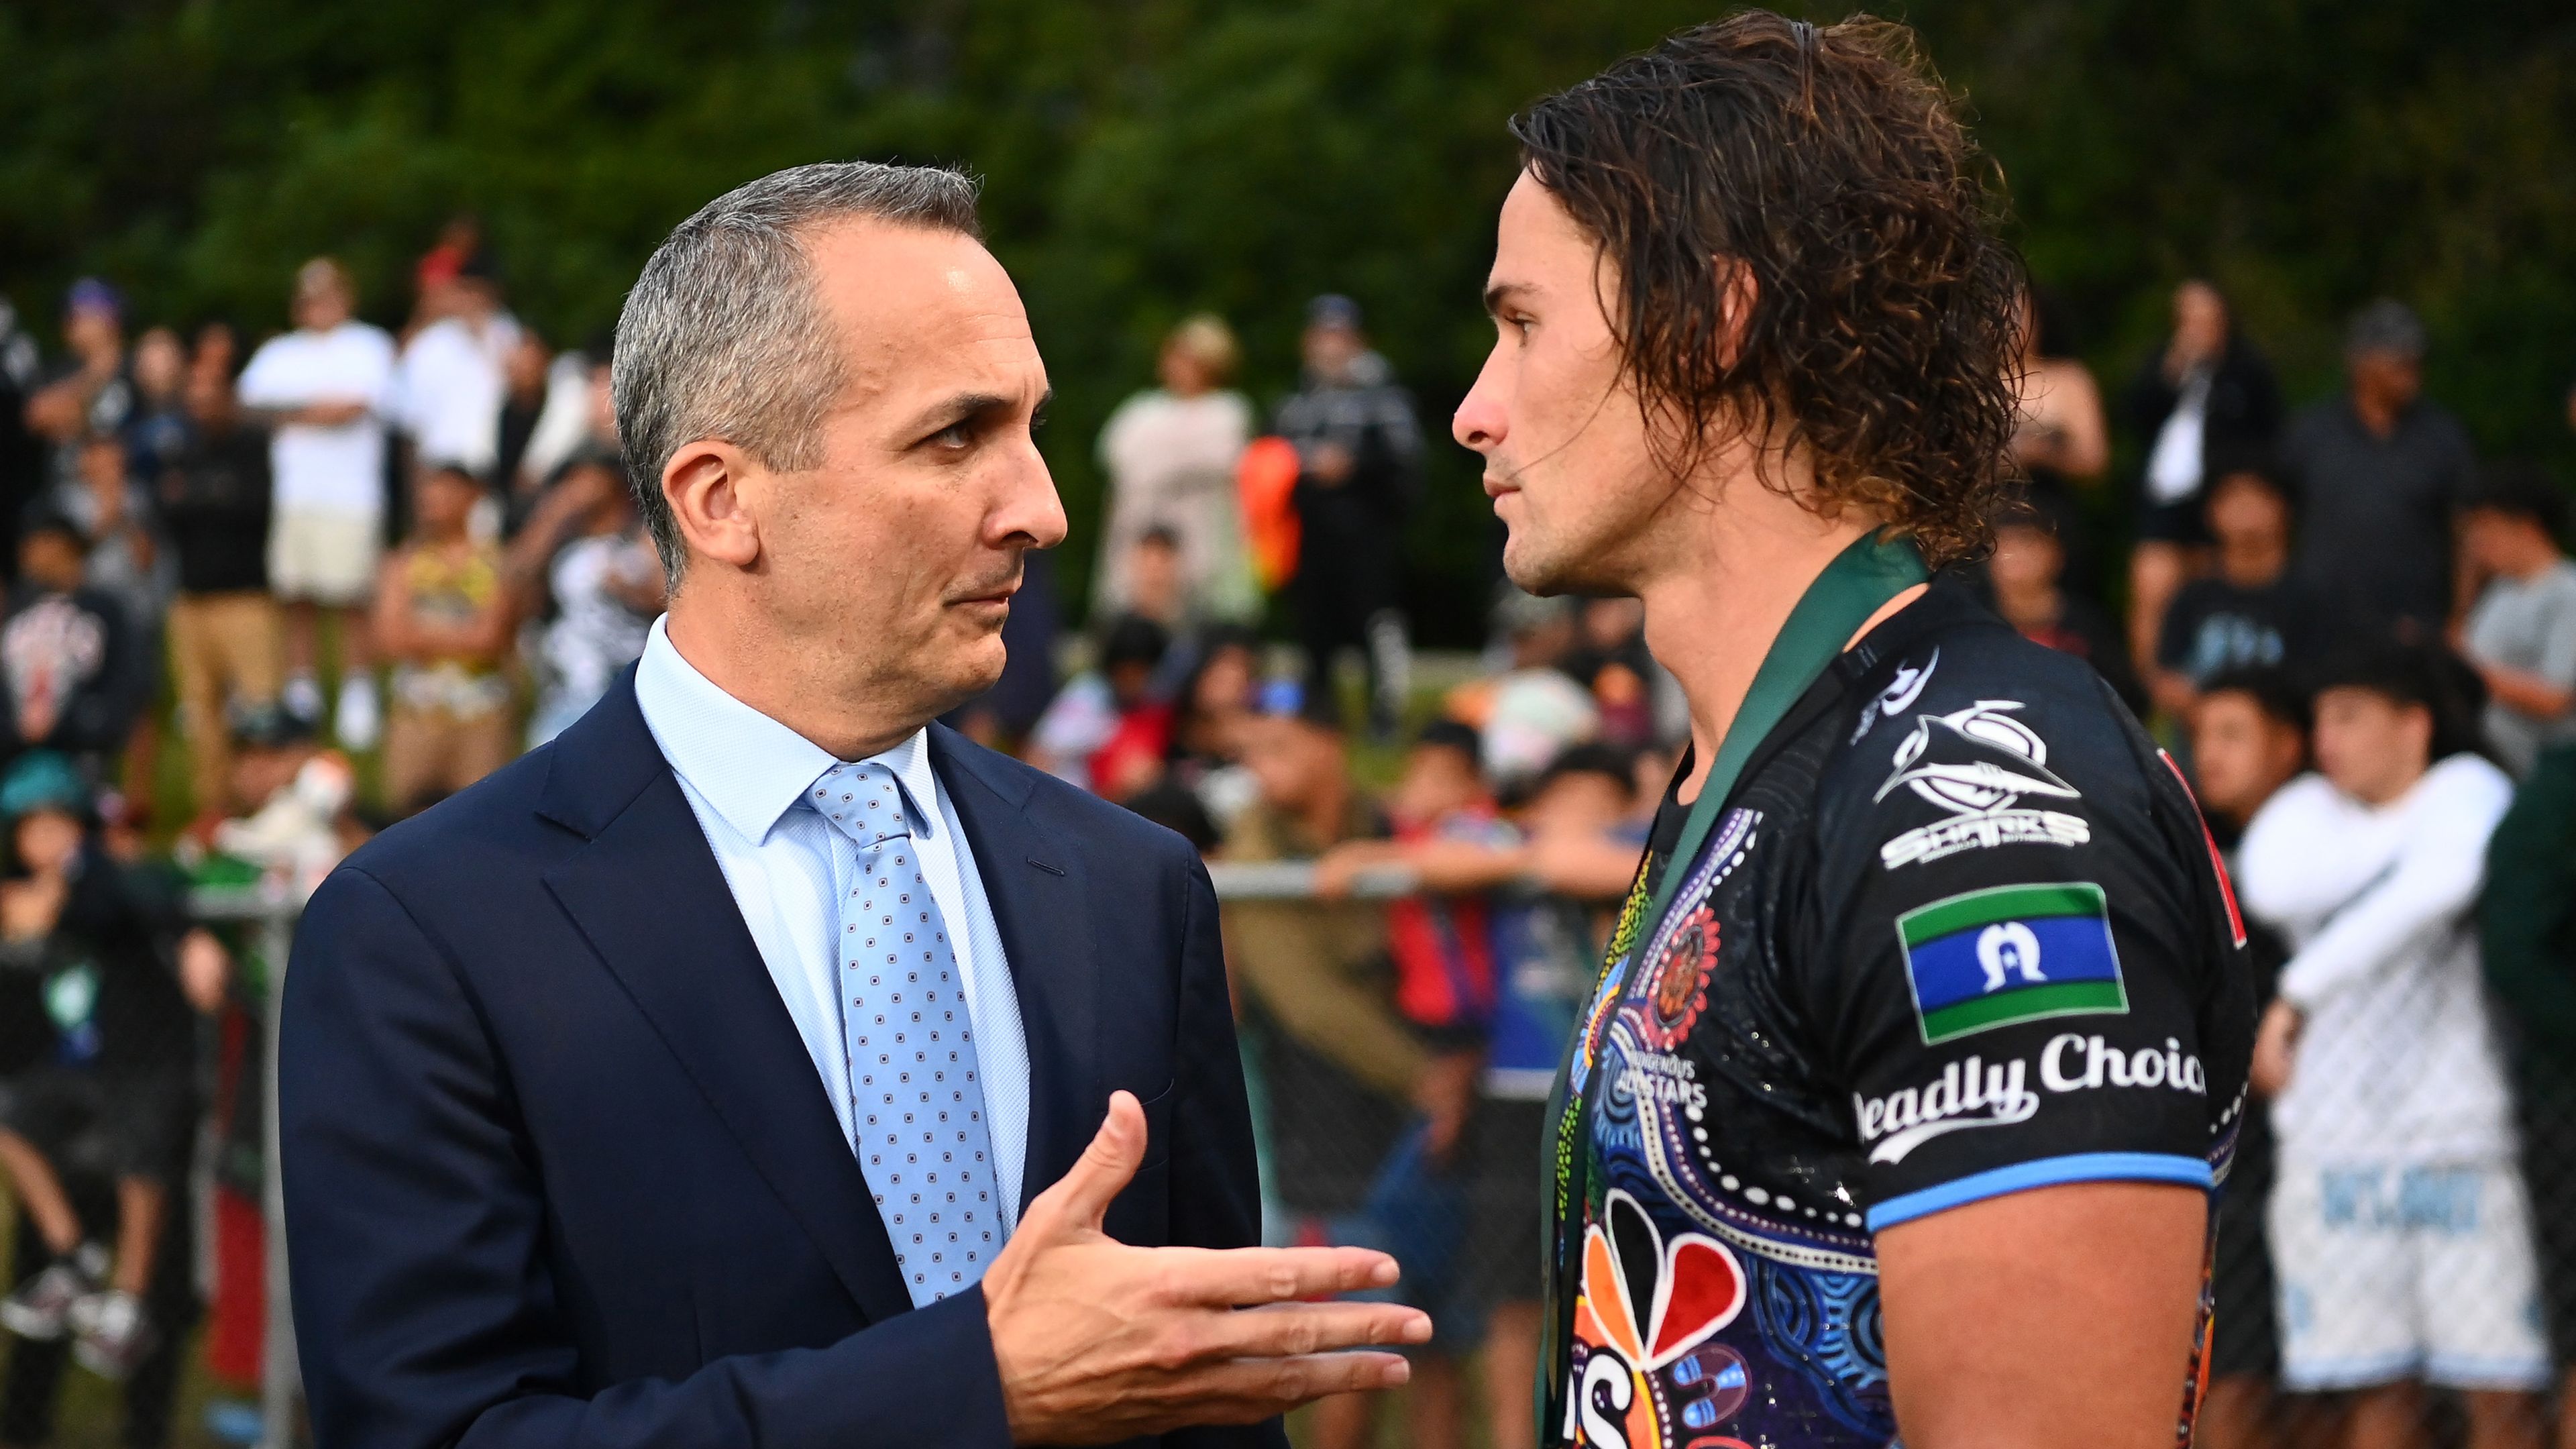 ROTORUA, NEW ZEALAND - FEBRUARY 11: Andrew Abdo, NRL CEO talks to Nicholas Hynes of the Indigenous All Stars during the 2023 NRL All Stars match between Indigenous All Stars and Maori All Stars at Rotorua International Stadium on February 11, 2023 in Rotorua, New Zealand. (Photo by Hannah Peters/Getty Images)